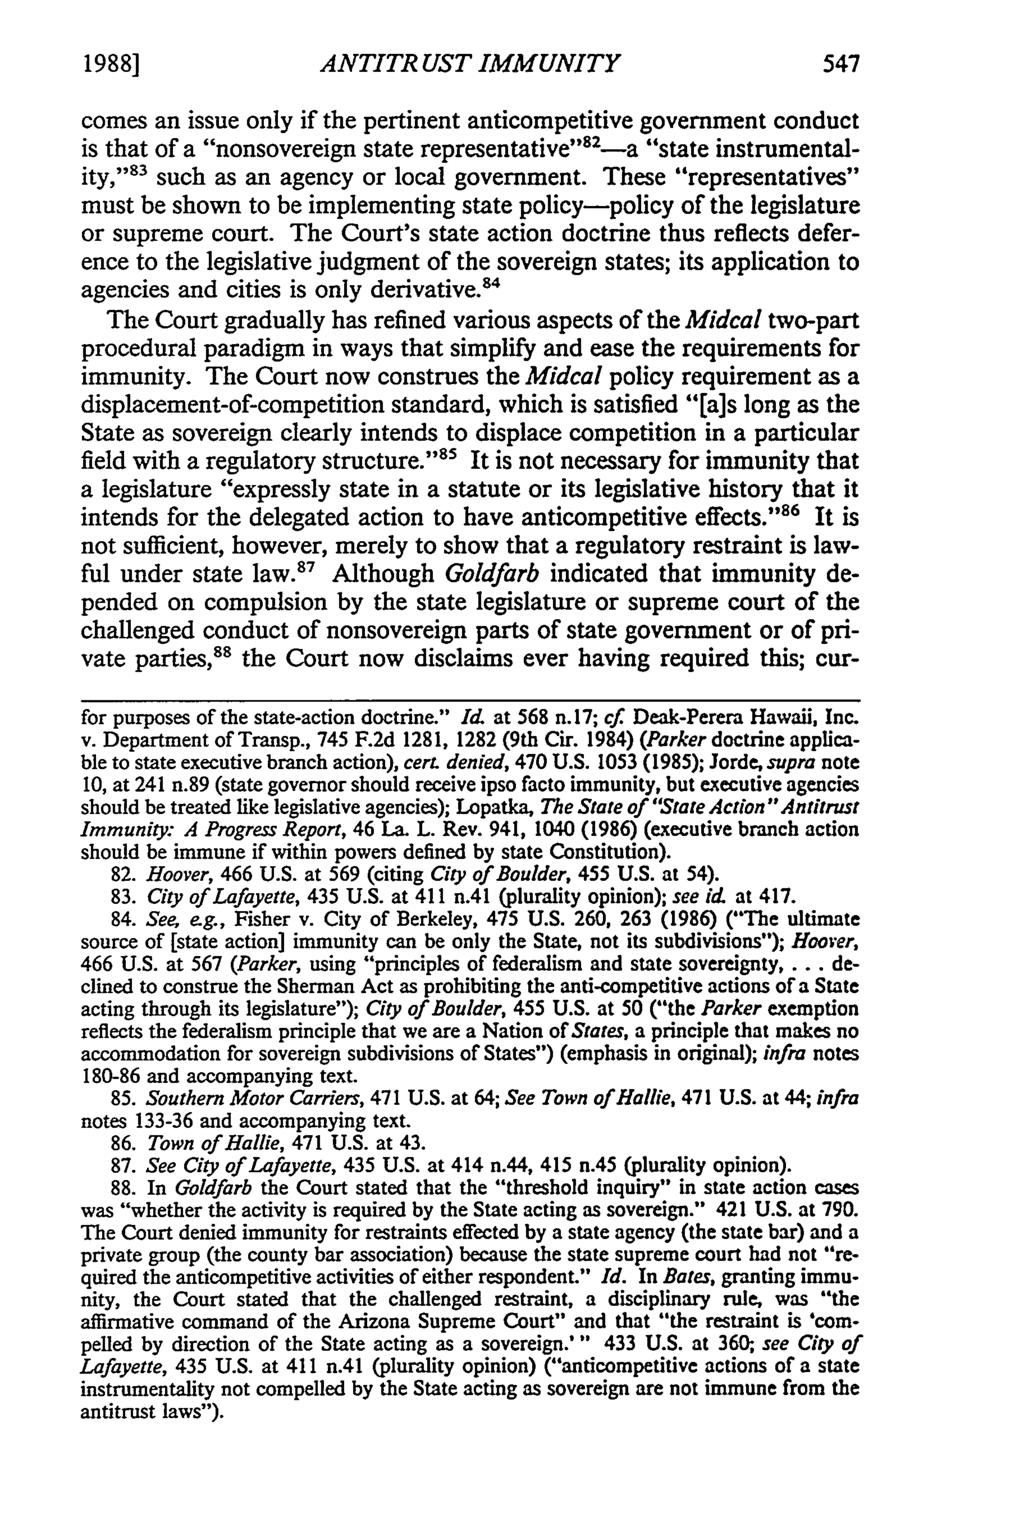 1988] ANTITRUST IMMUNITY comes an issue only if the pertinent anticompetitive government conduct is that of a "nonsovereign state representative" 82 -a "state instrumentality," ' 83 such as an agency